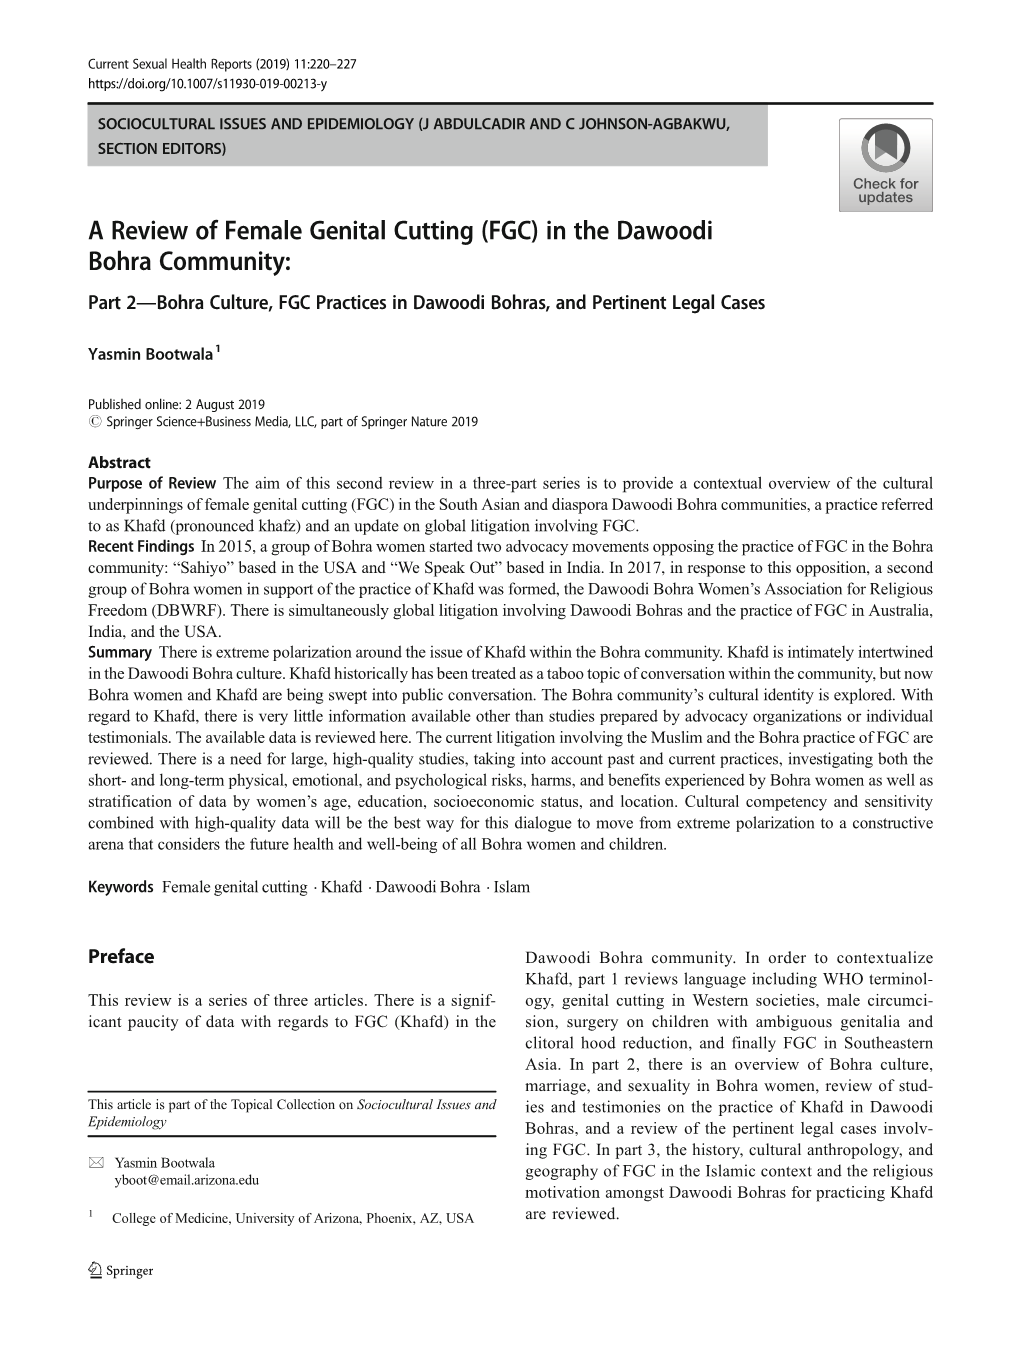 A Review of Female Genital Cutting (FGC) in the Dawoodi Bohra Community: Part 2—Bohra Culture, FGC Practices in Dawoodi Bohras, and Pertinent Legal Cases